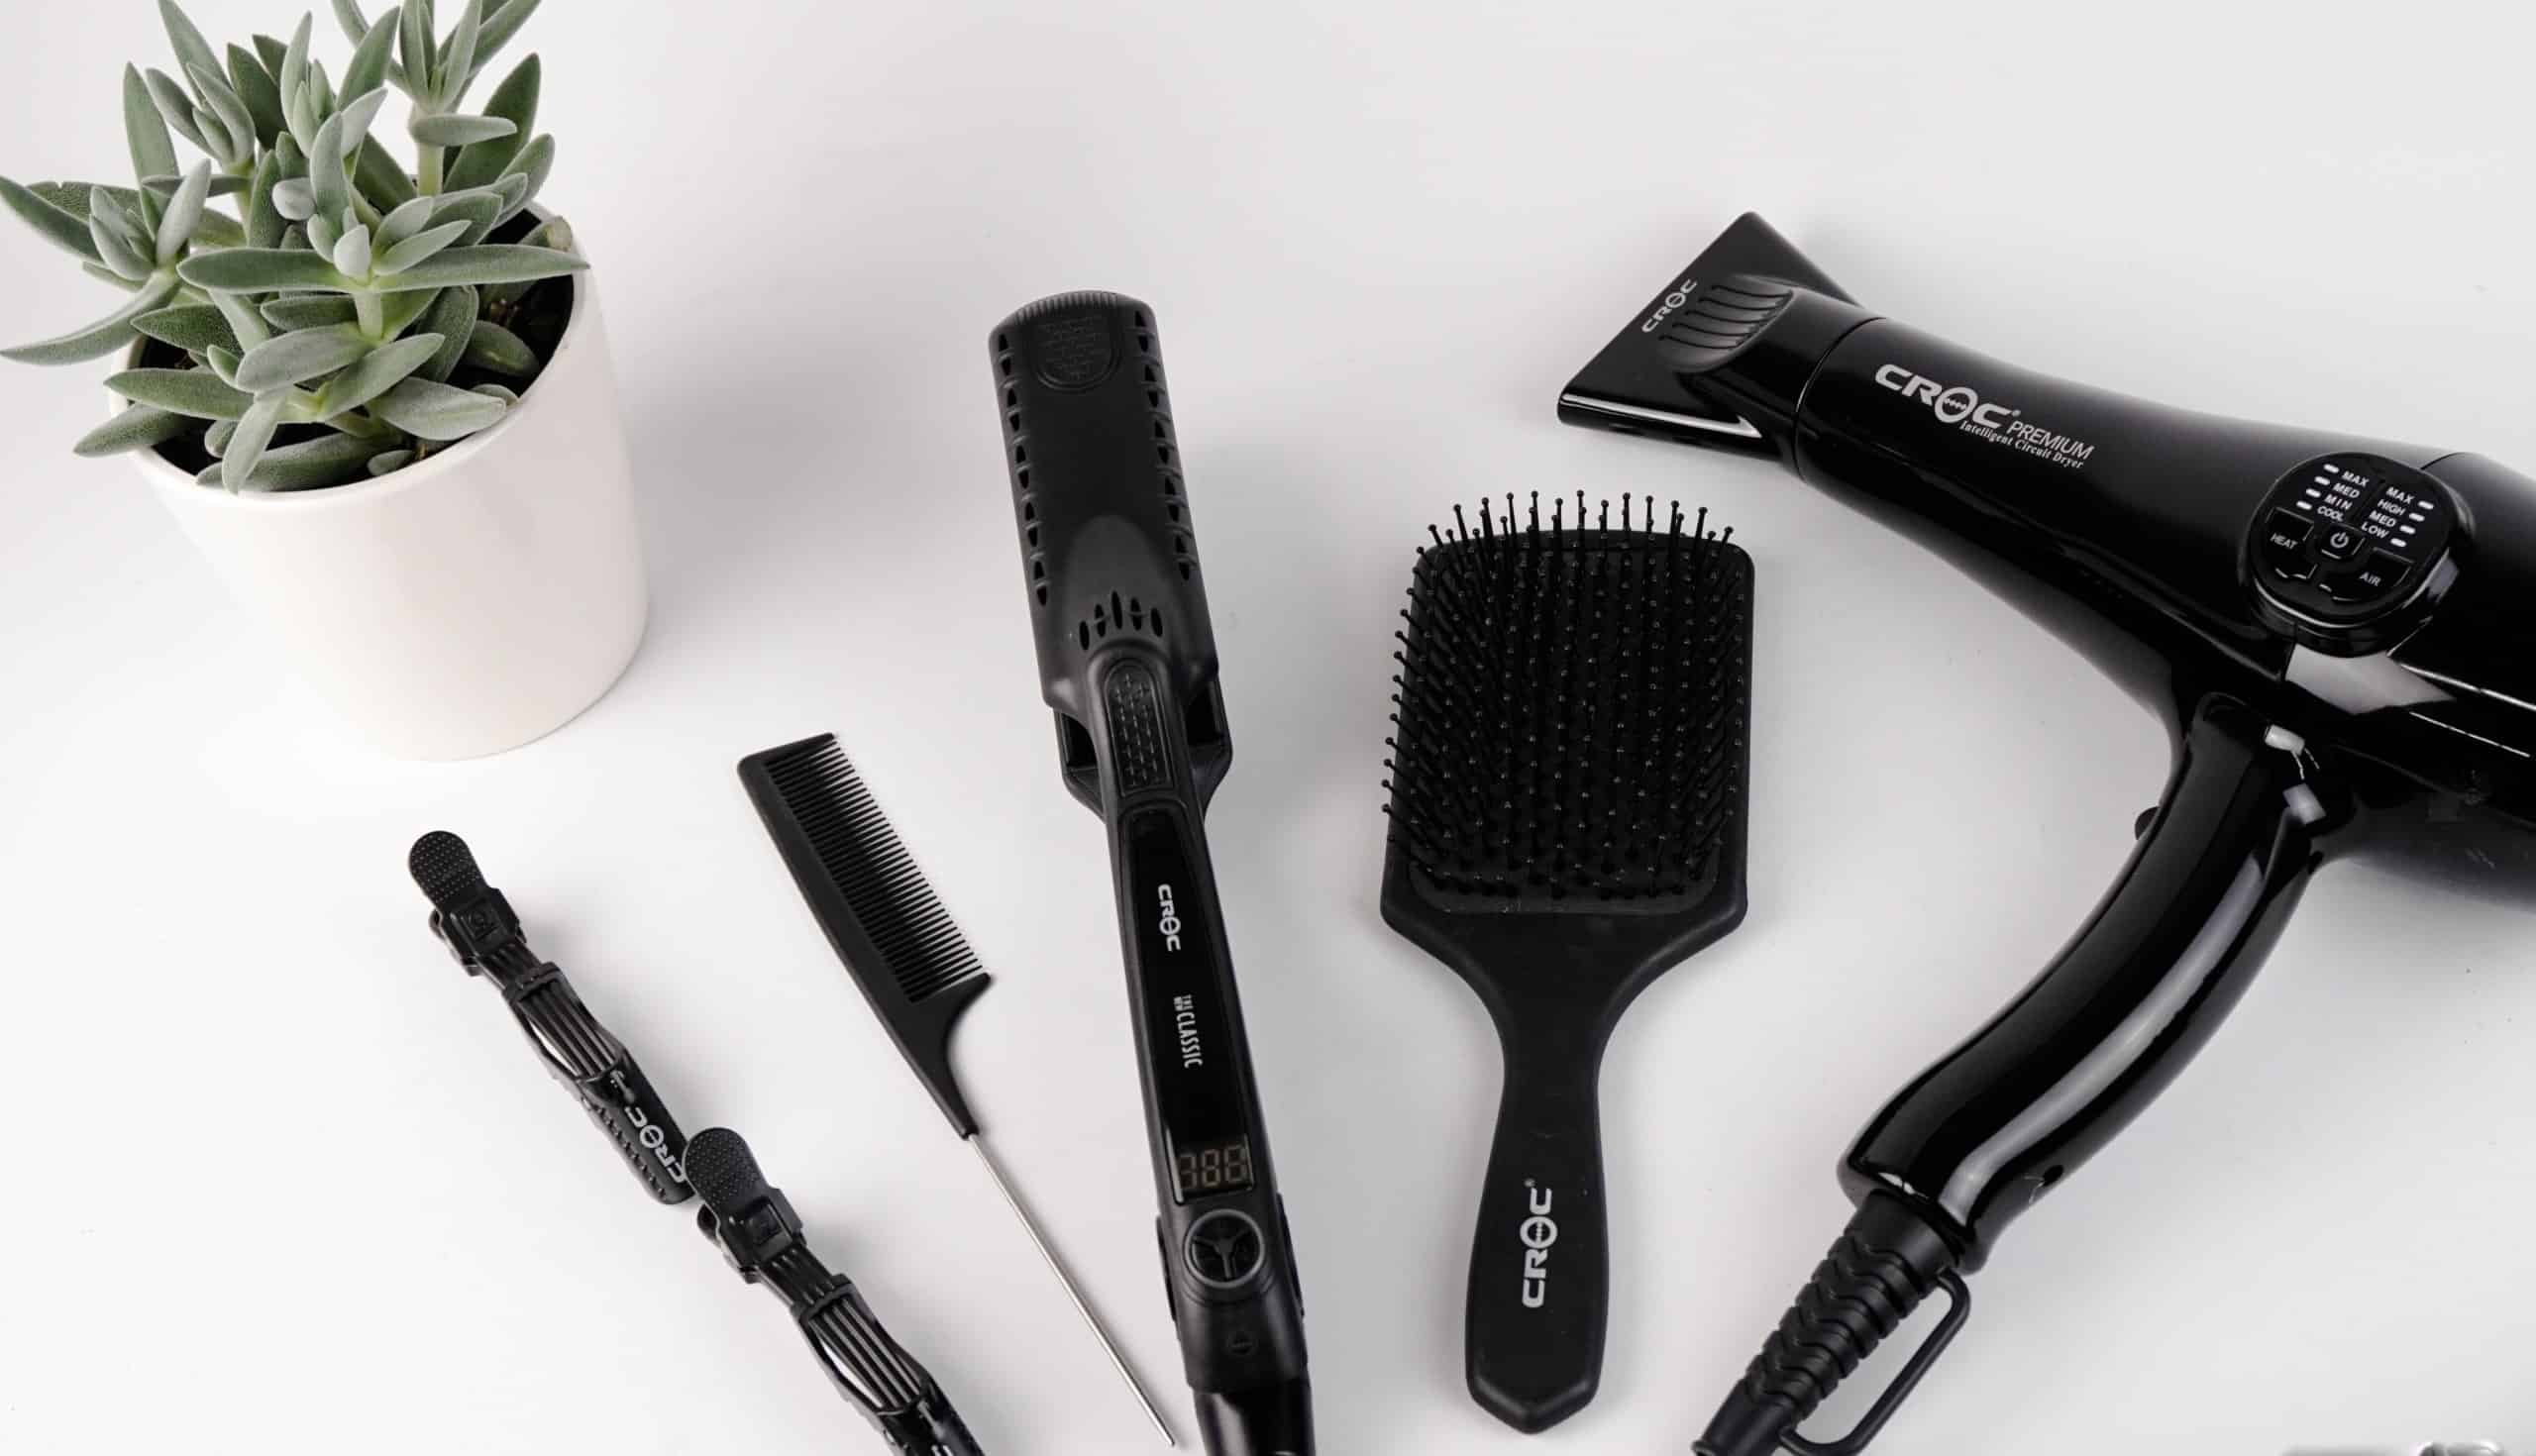 The hairdressing supplies you’ll need once you qualify